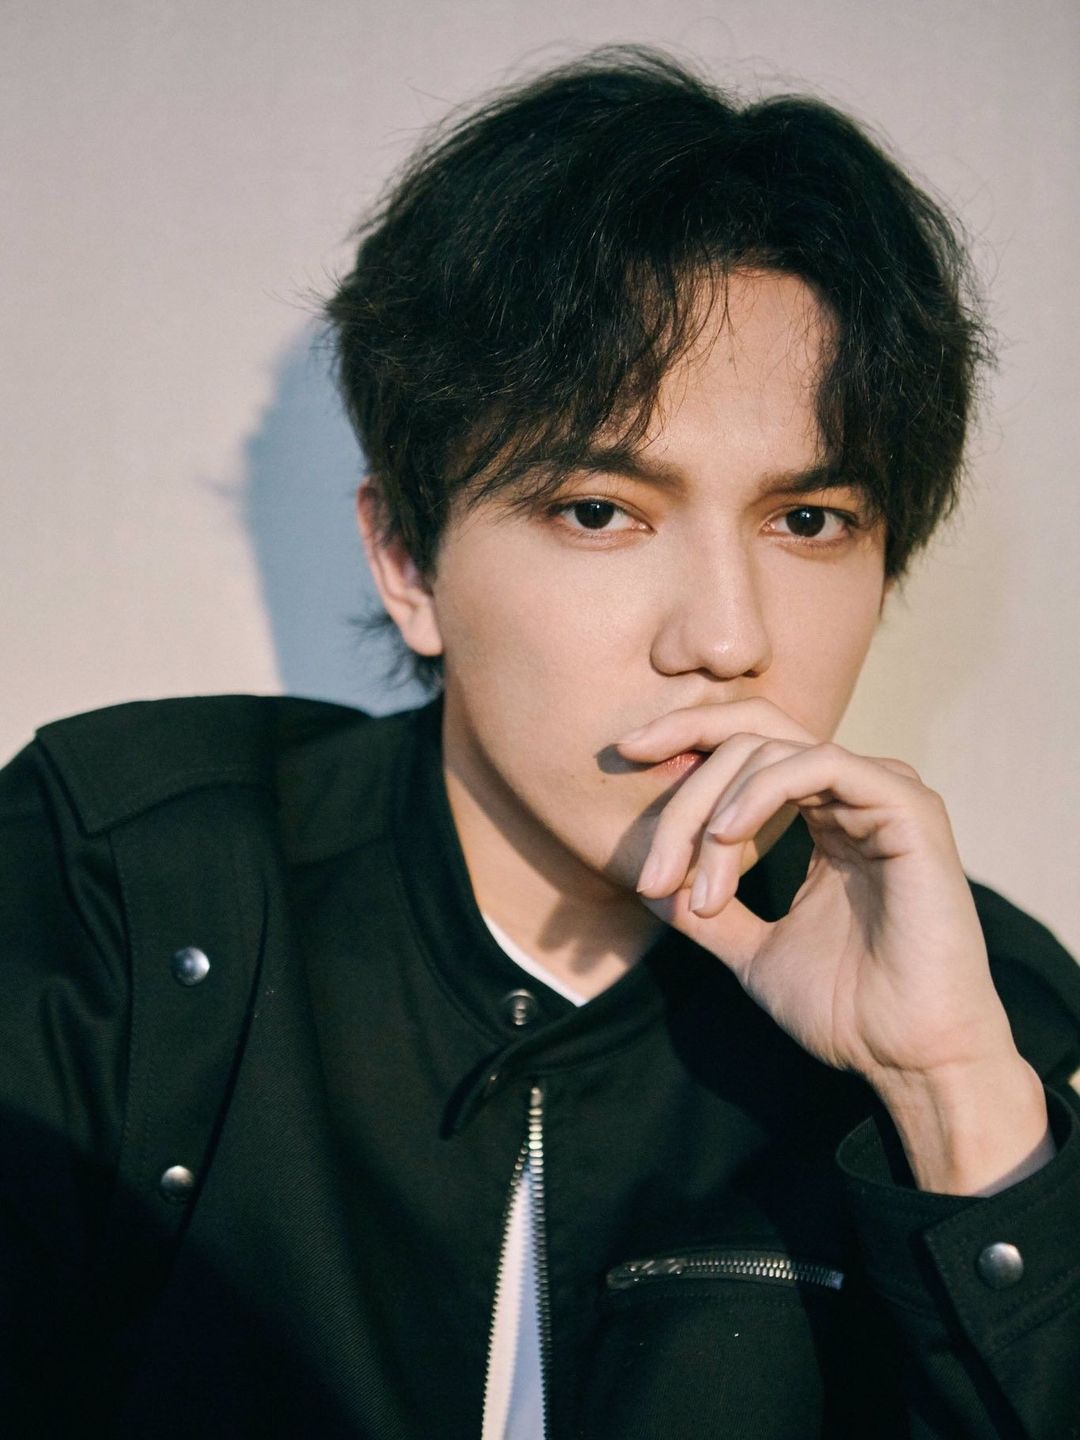 Dimash Kudaibergen how old is he